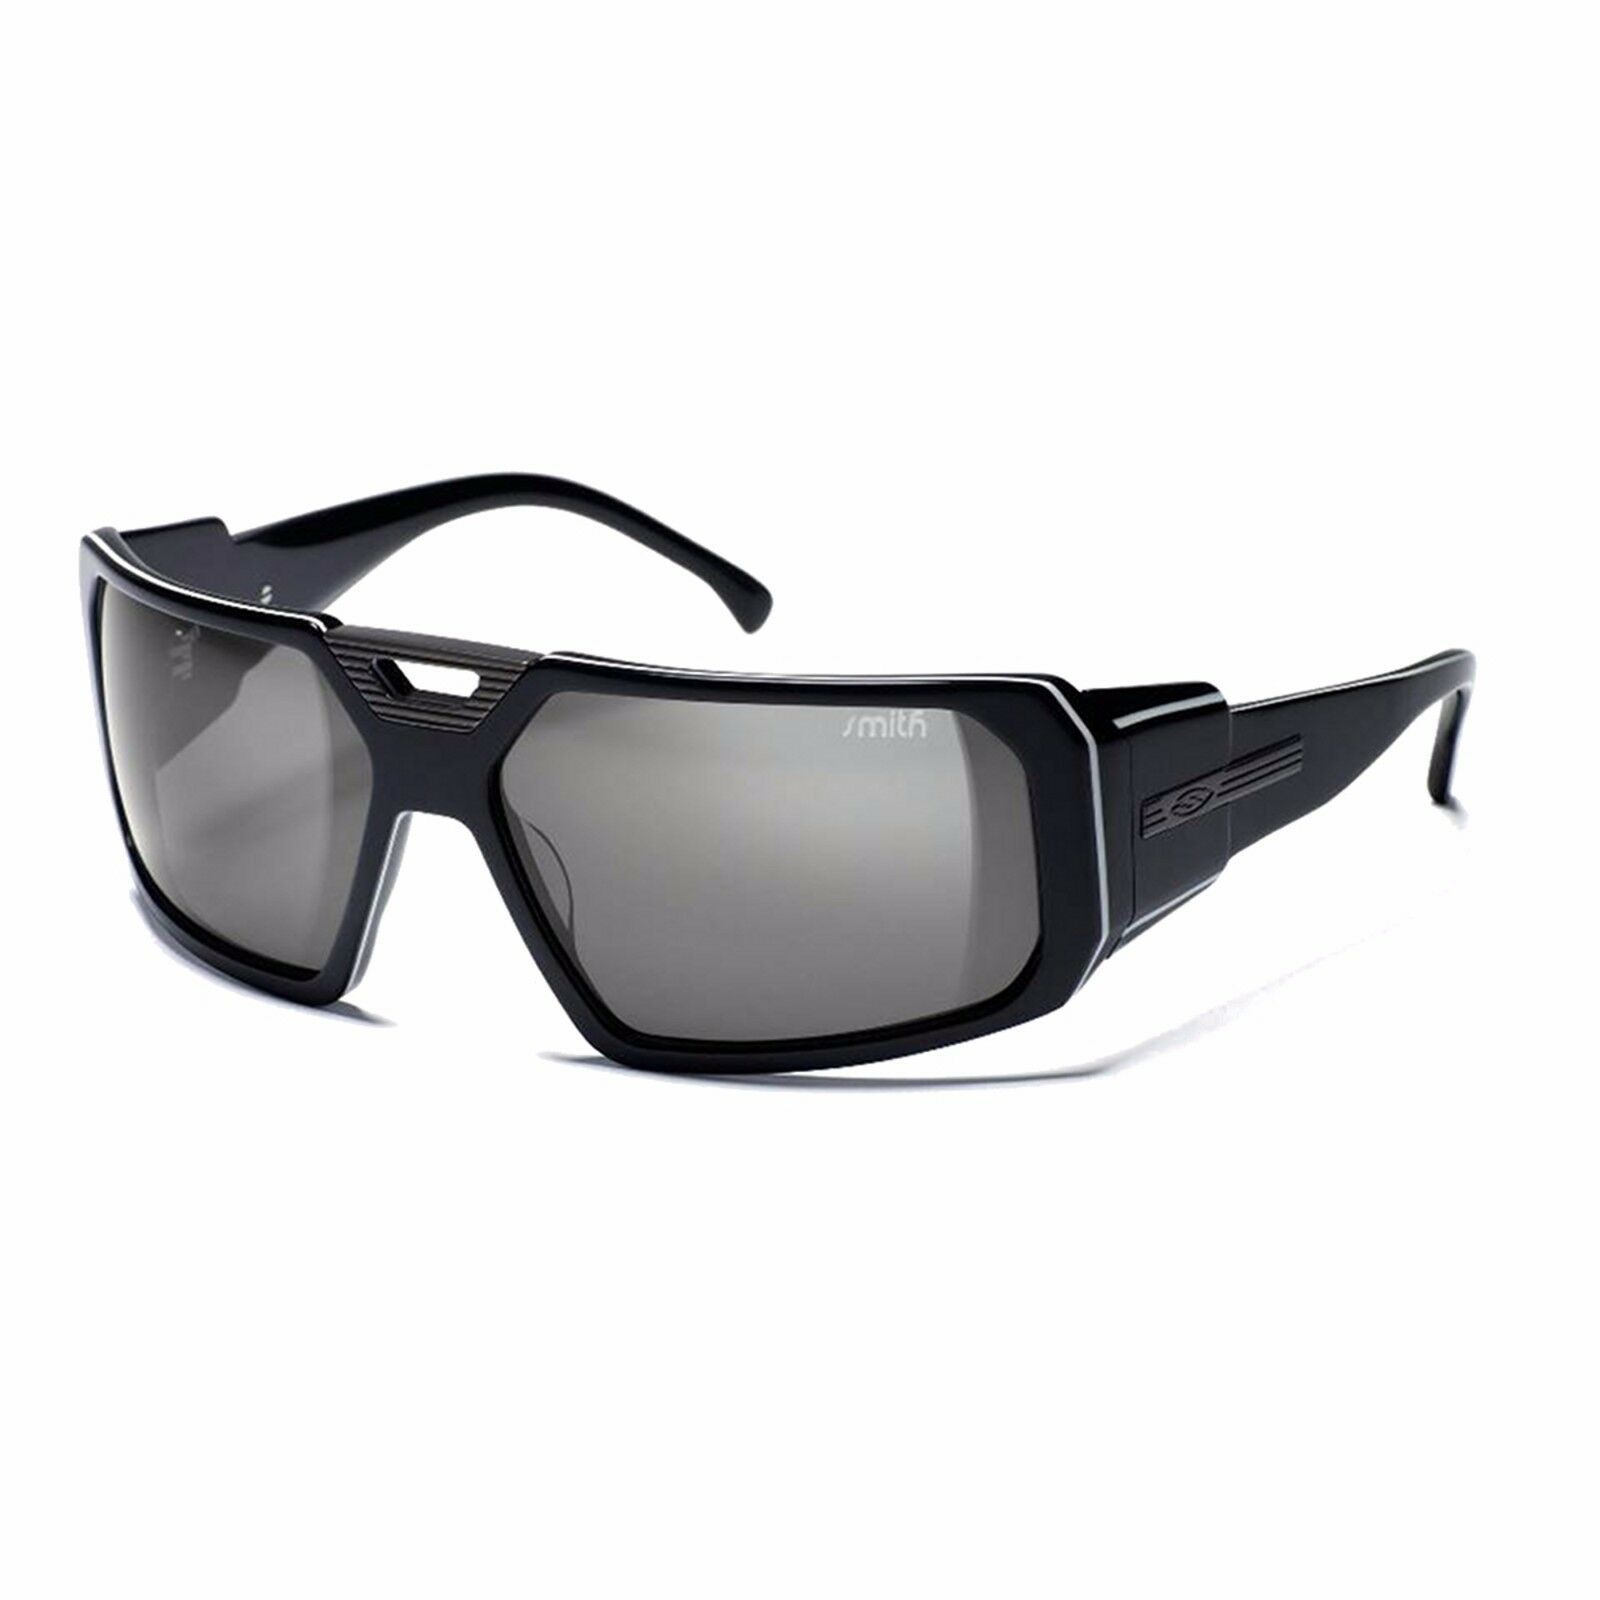 Primary image for SMITH OPTIC YES YES Y'ALL SUNGLASSES BLACK WHITE FRAME, GRAY LENS 125-16-65